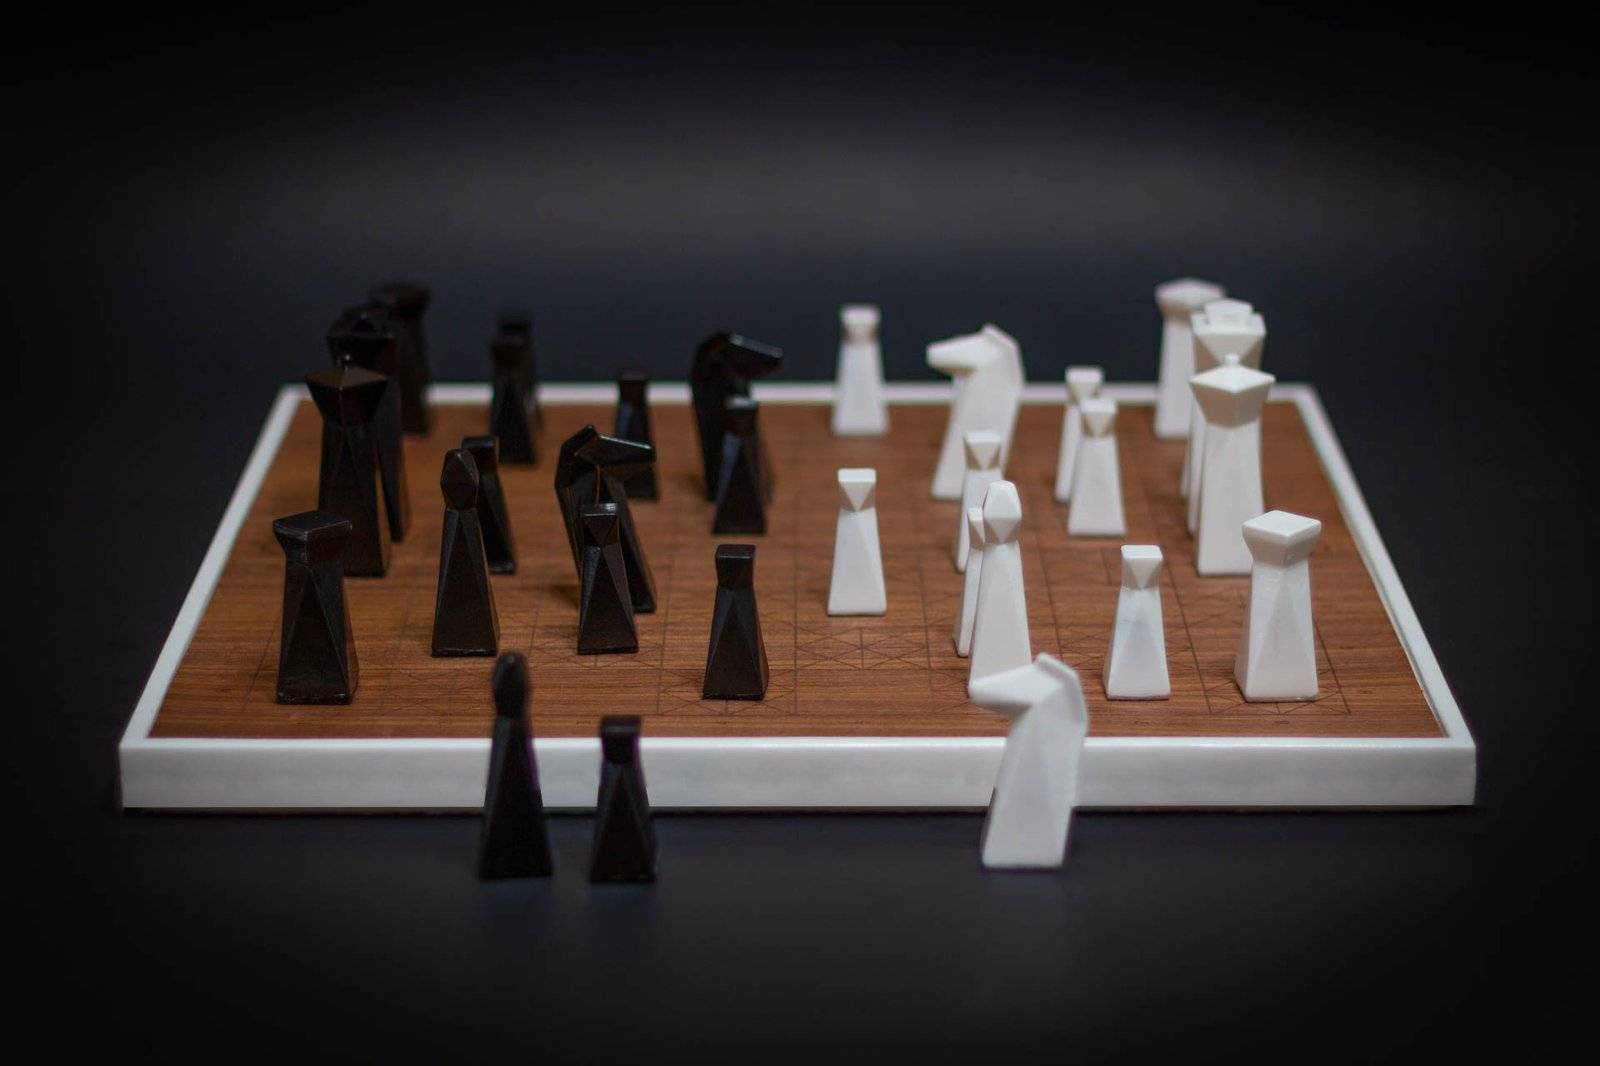 All Chess Boards and Chess Game Sets in Chess 